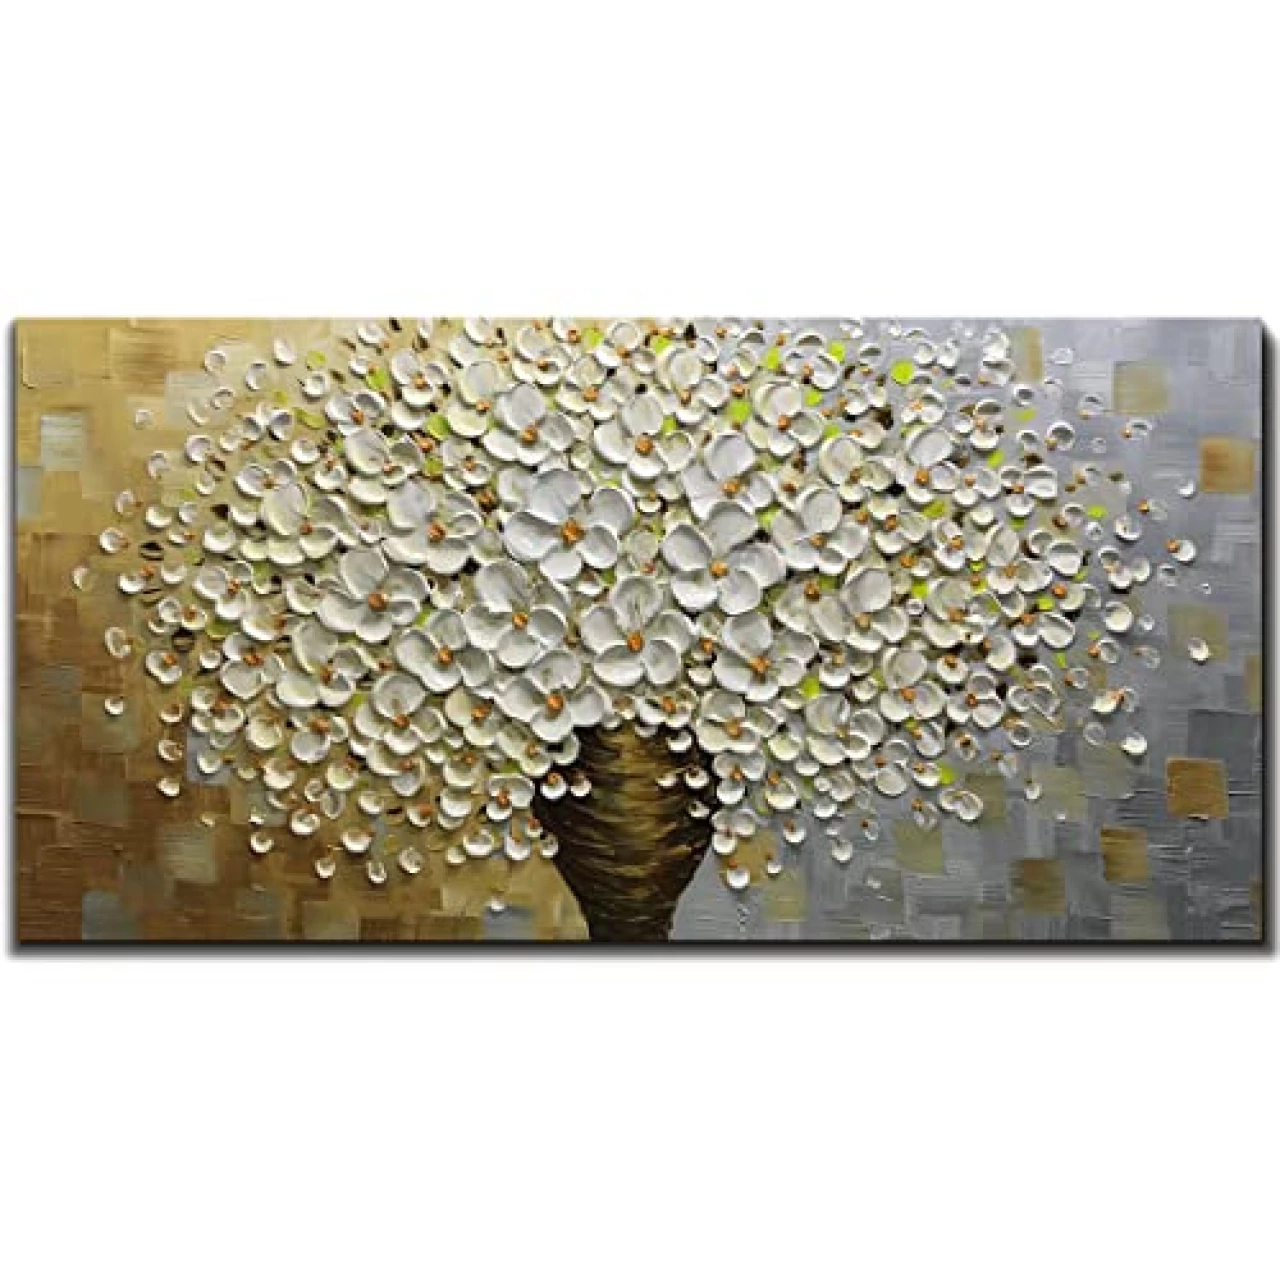 V-inspire Art,24x48 Inch Modern Abstract Canvas Floral Artwork